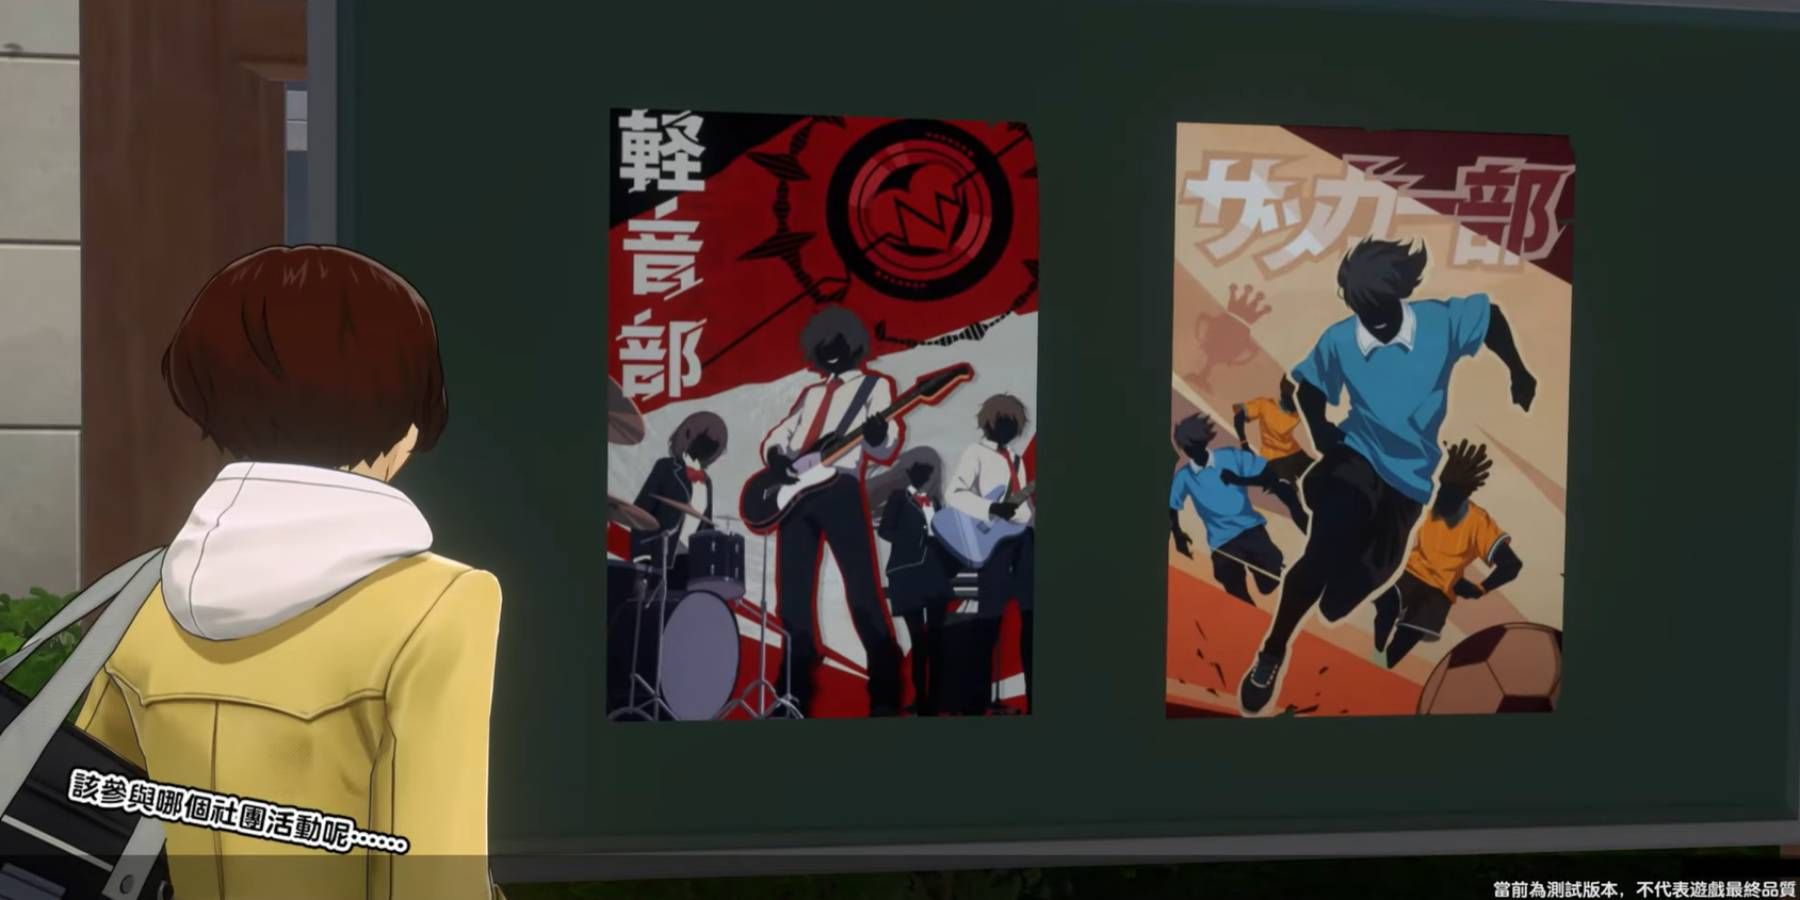 Wonder from Persona 5: The Phantom X looking at some posters outside of the guitar mini-game